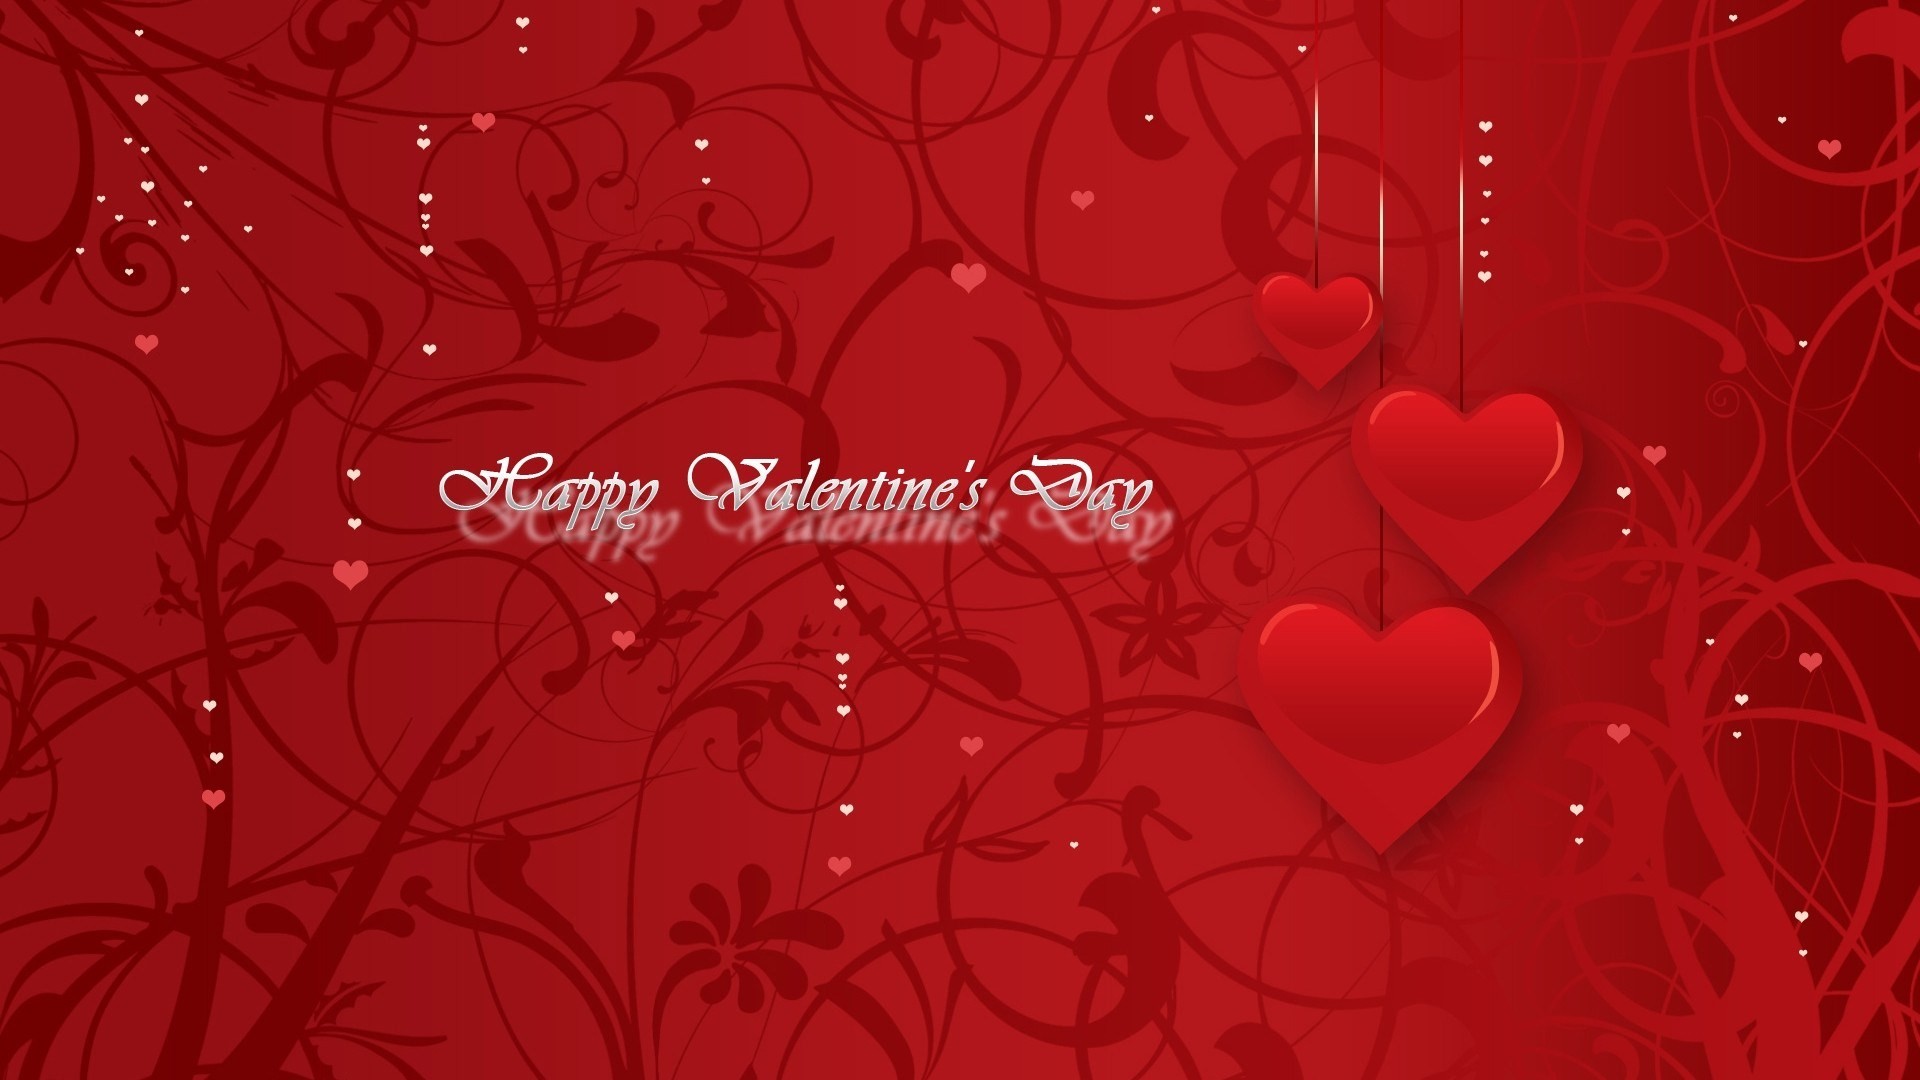 1920x1080 valentine's day black red | High Definition Wallpapers (HD Wallpapers  1080p) | Pinterest